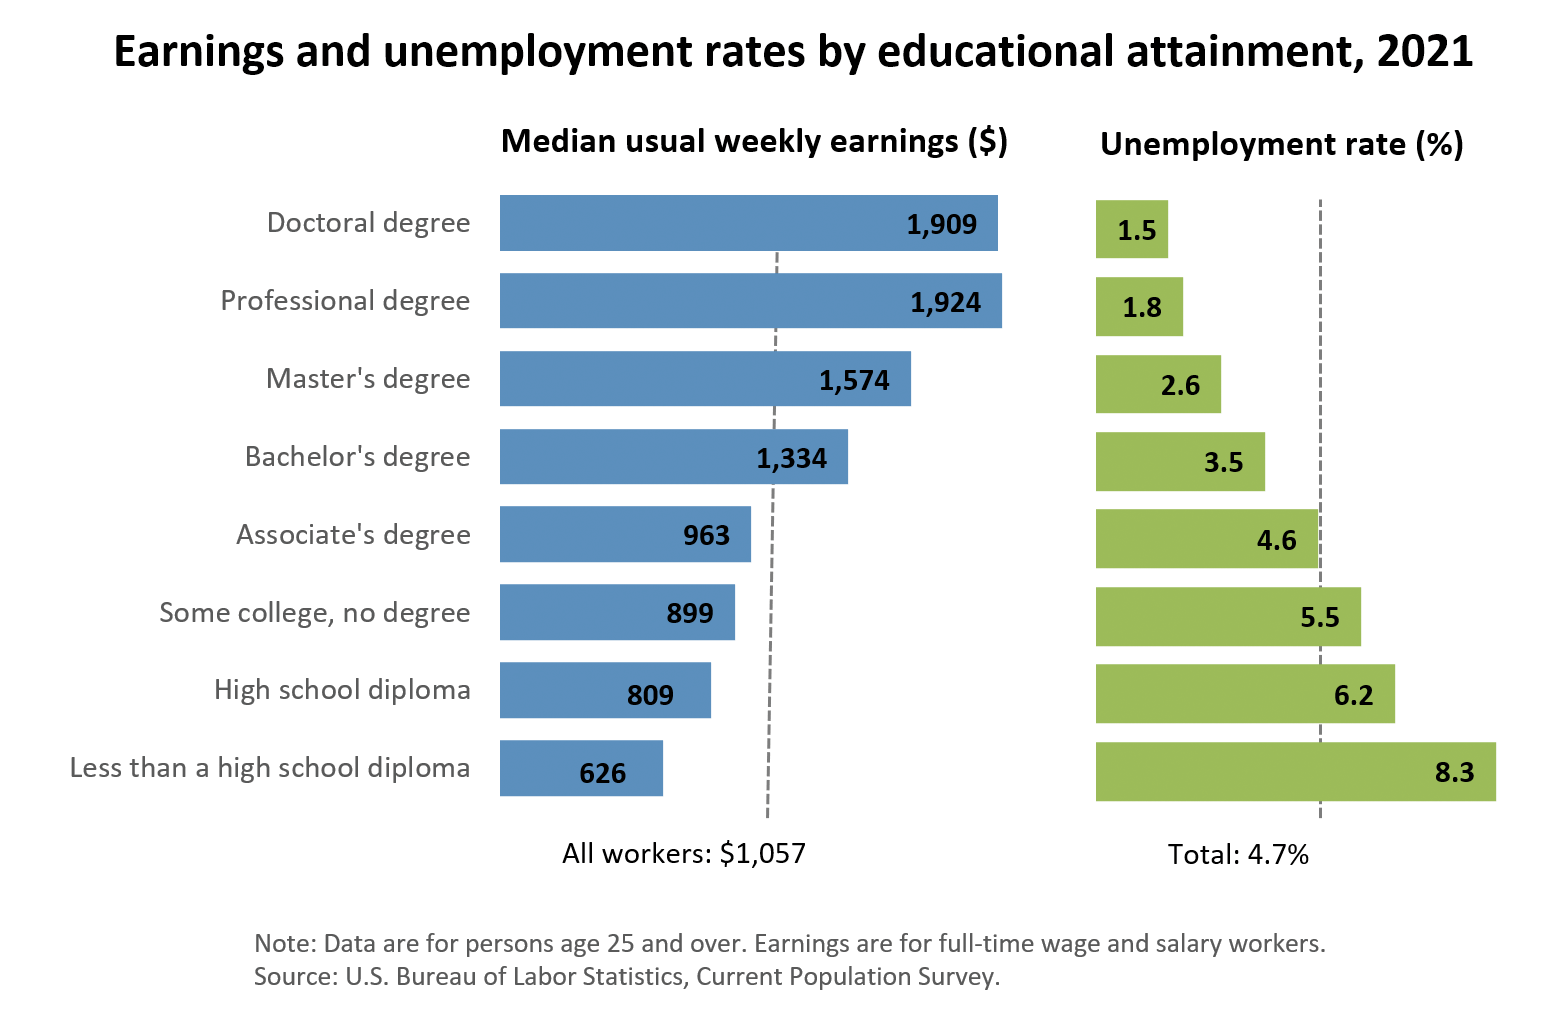 Bar graph comparison of Erning and unemployment rates by education attainment, 2021.